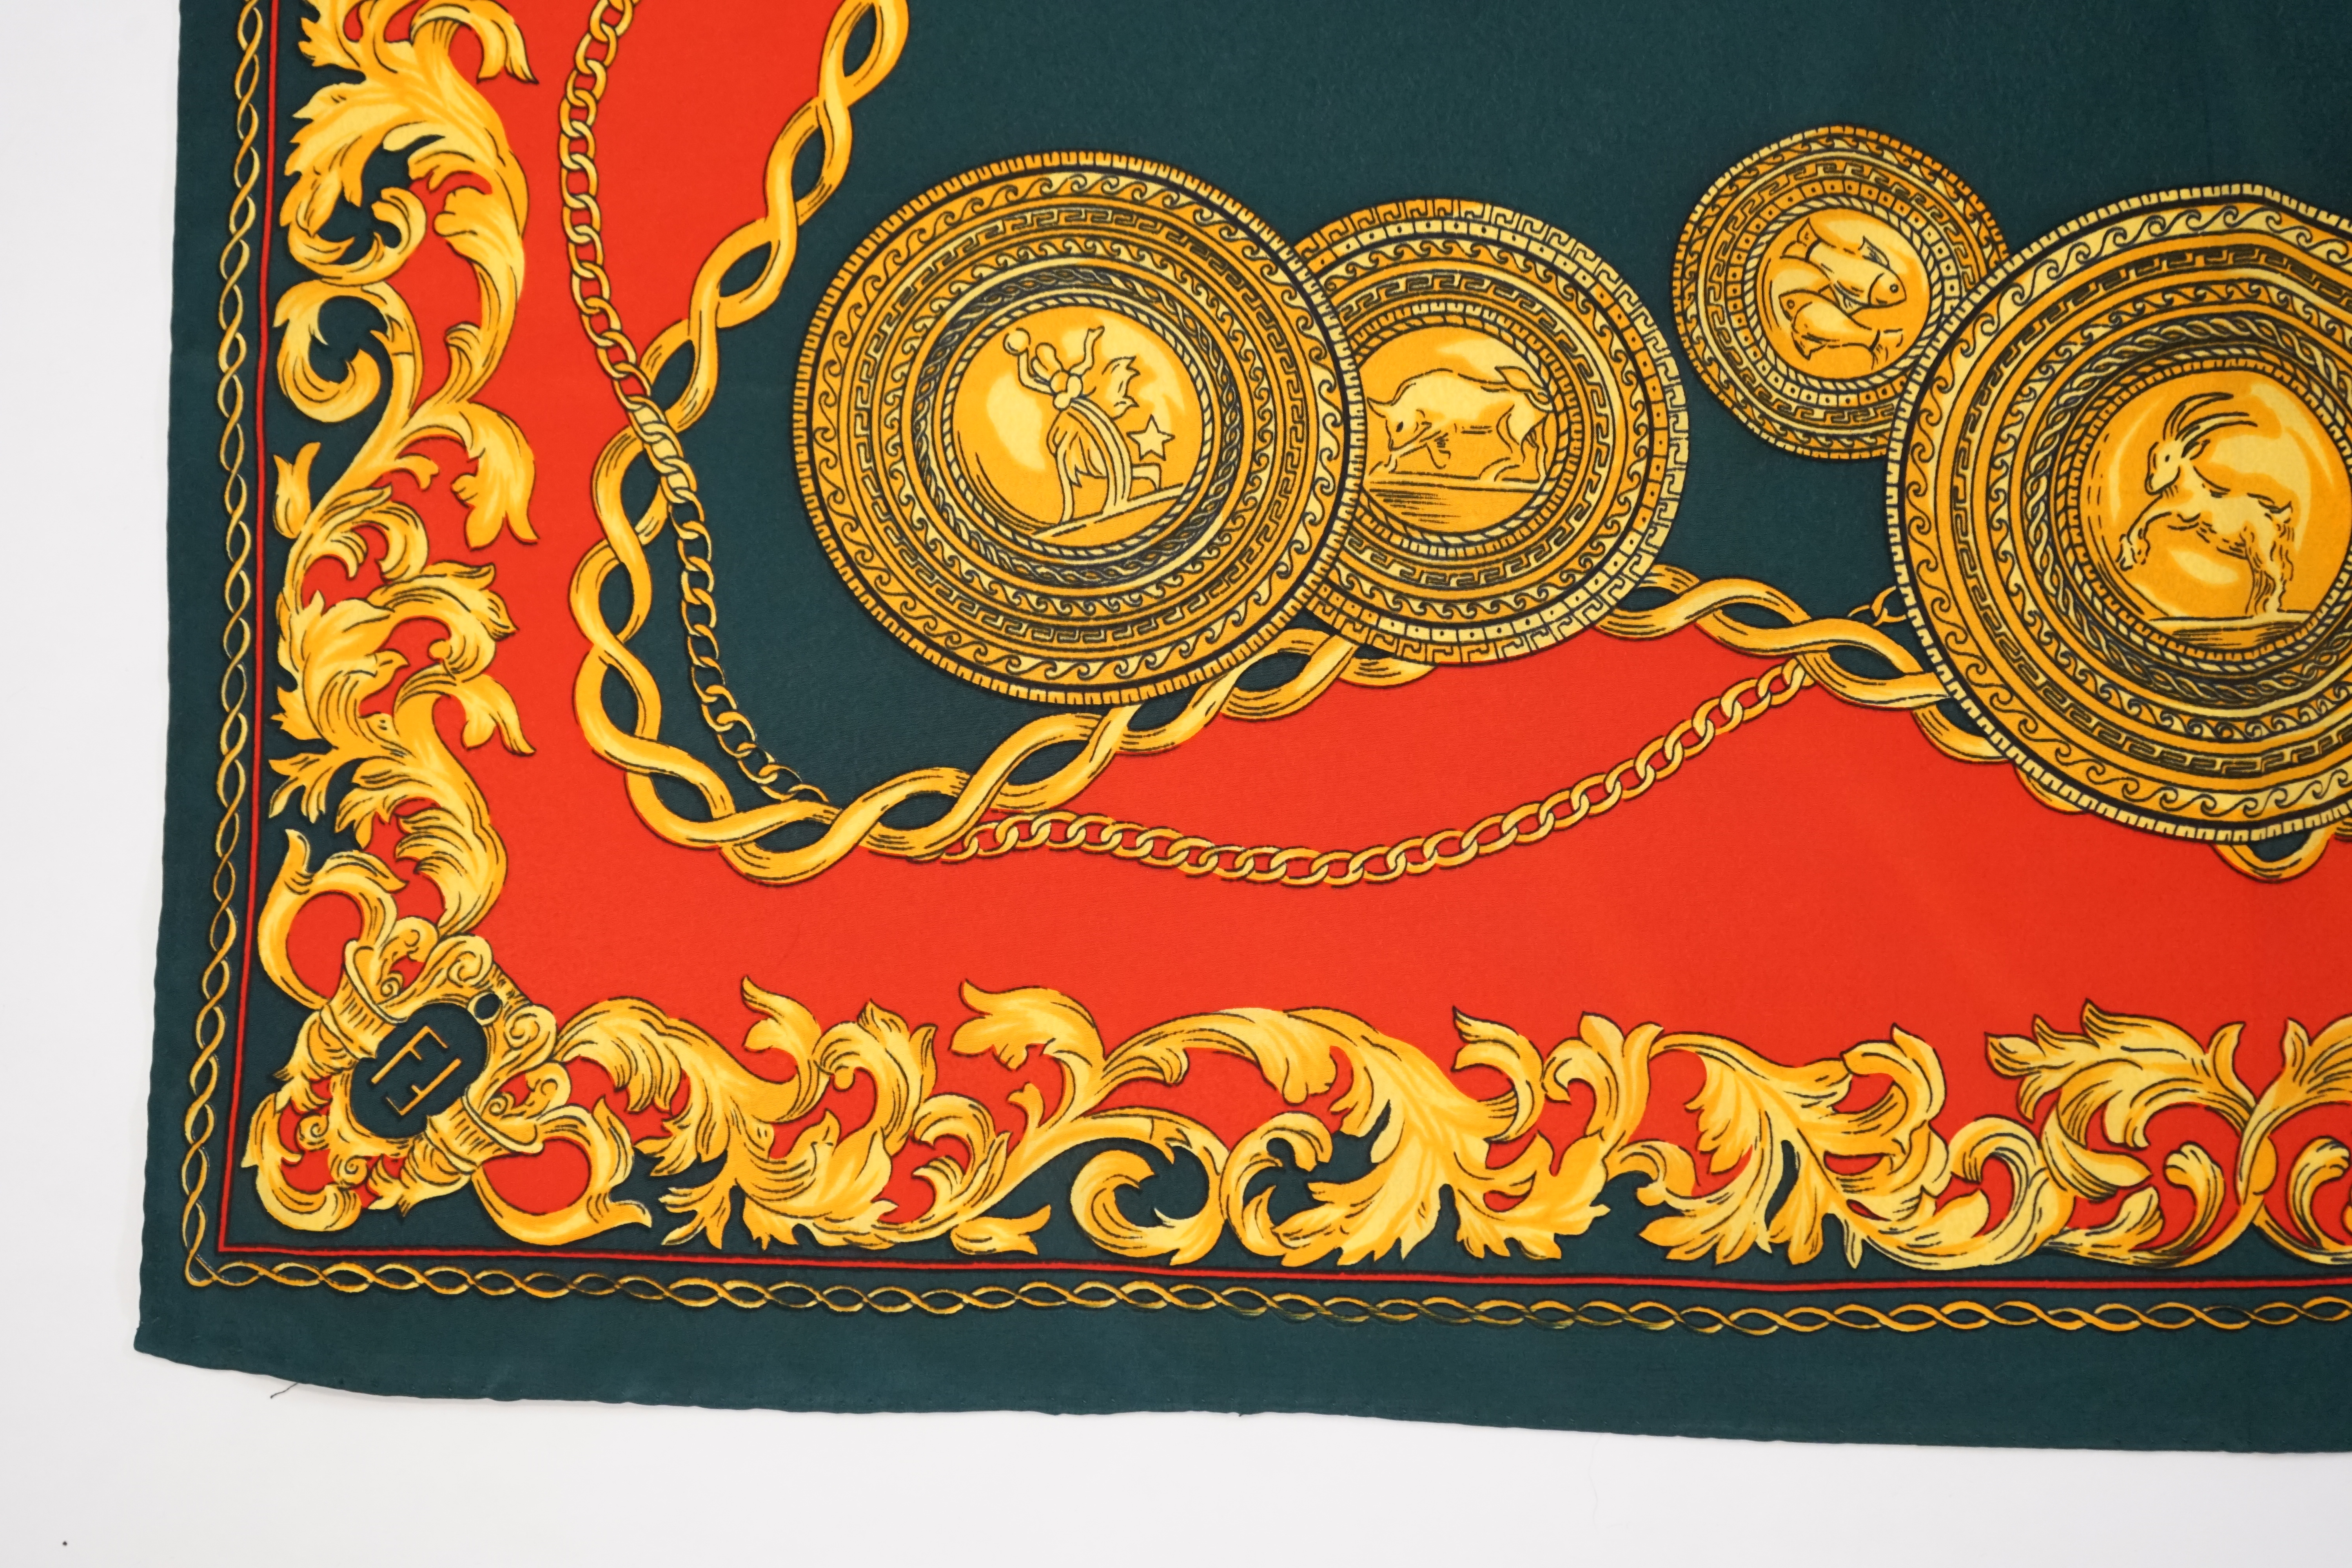 A Hermès silk scarf decorated with gold zodiac sign animals and hybrids, gold foliage and chain design around the edges, 90 x 84cm